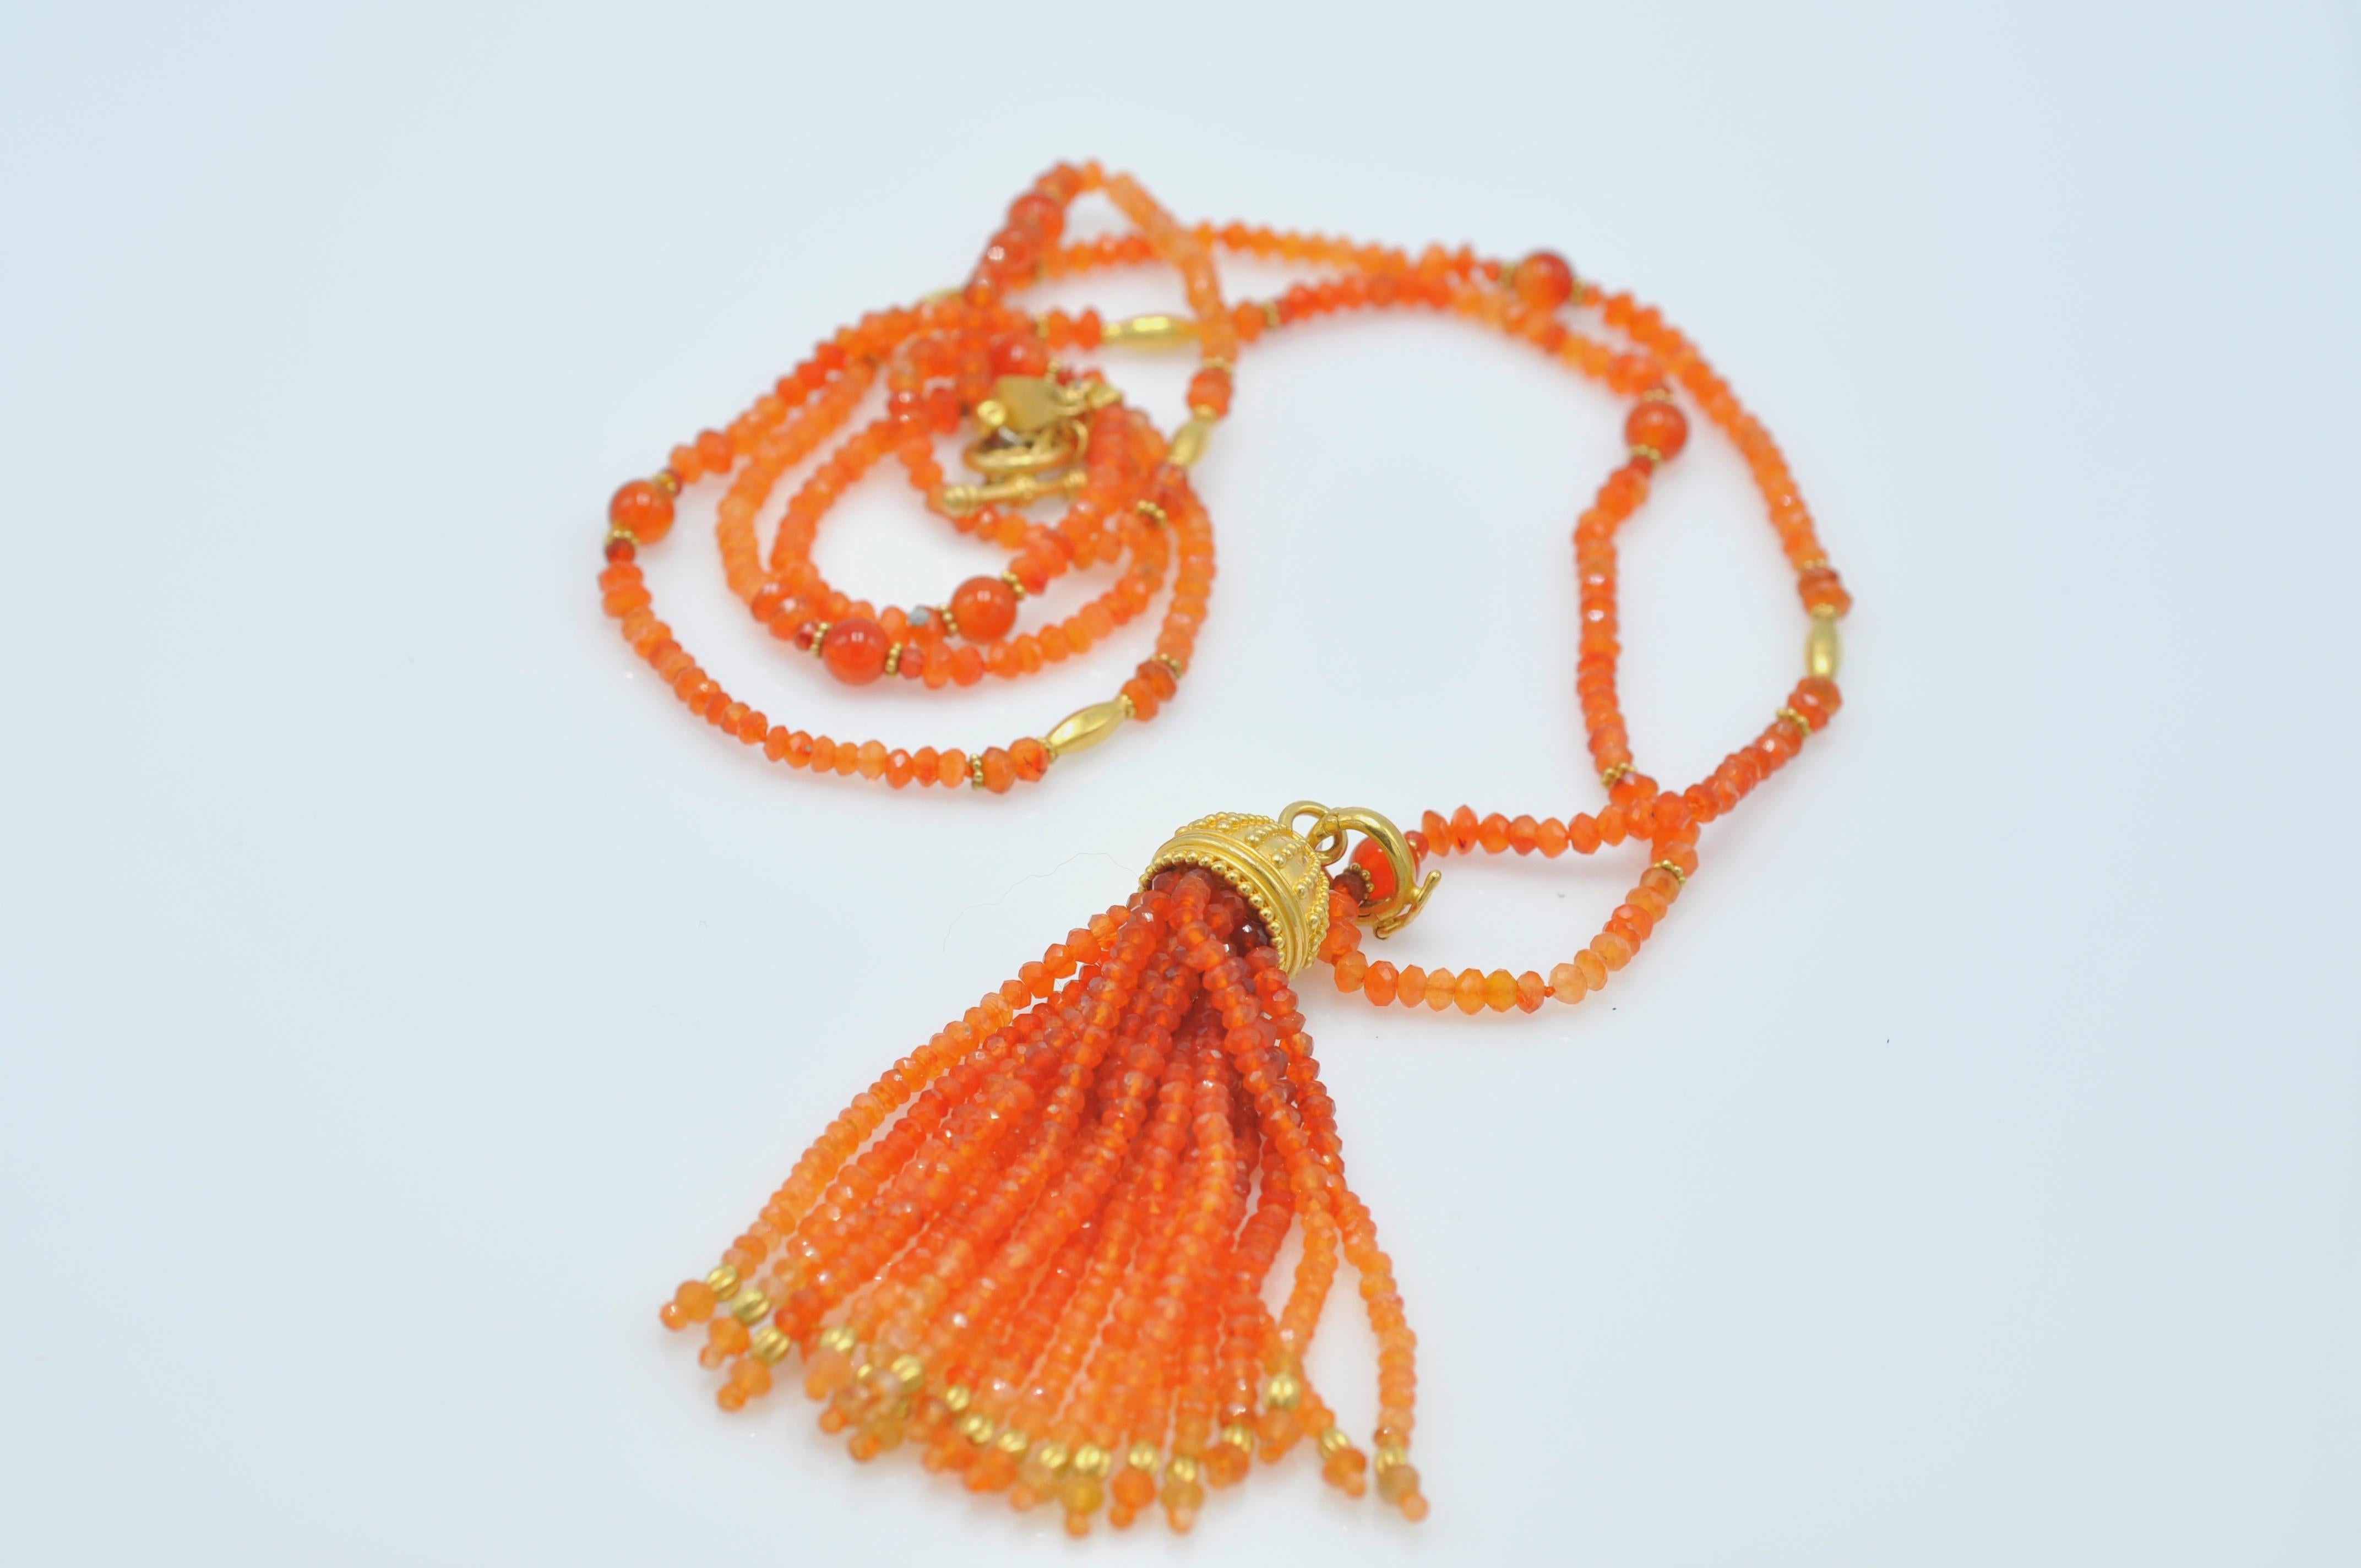 Carolyn Tyler-designed, faceted carnelian bead necklace with 18K Yellow Gold accents. The necklace measures 36 inches long and the Tassel measures 3 inches long. The necklace can be worn with or without the tassel, thereby adding to its versatility.